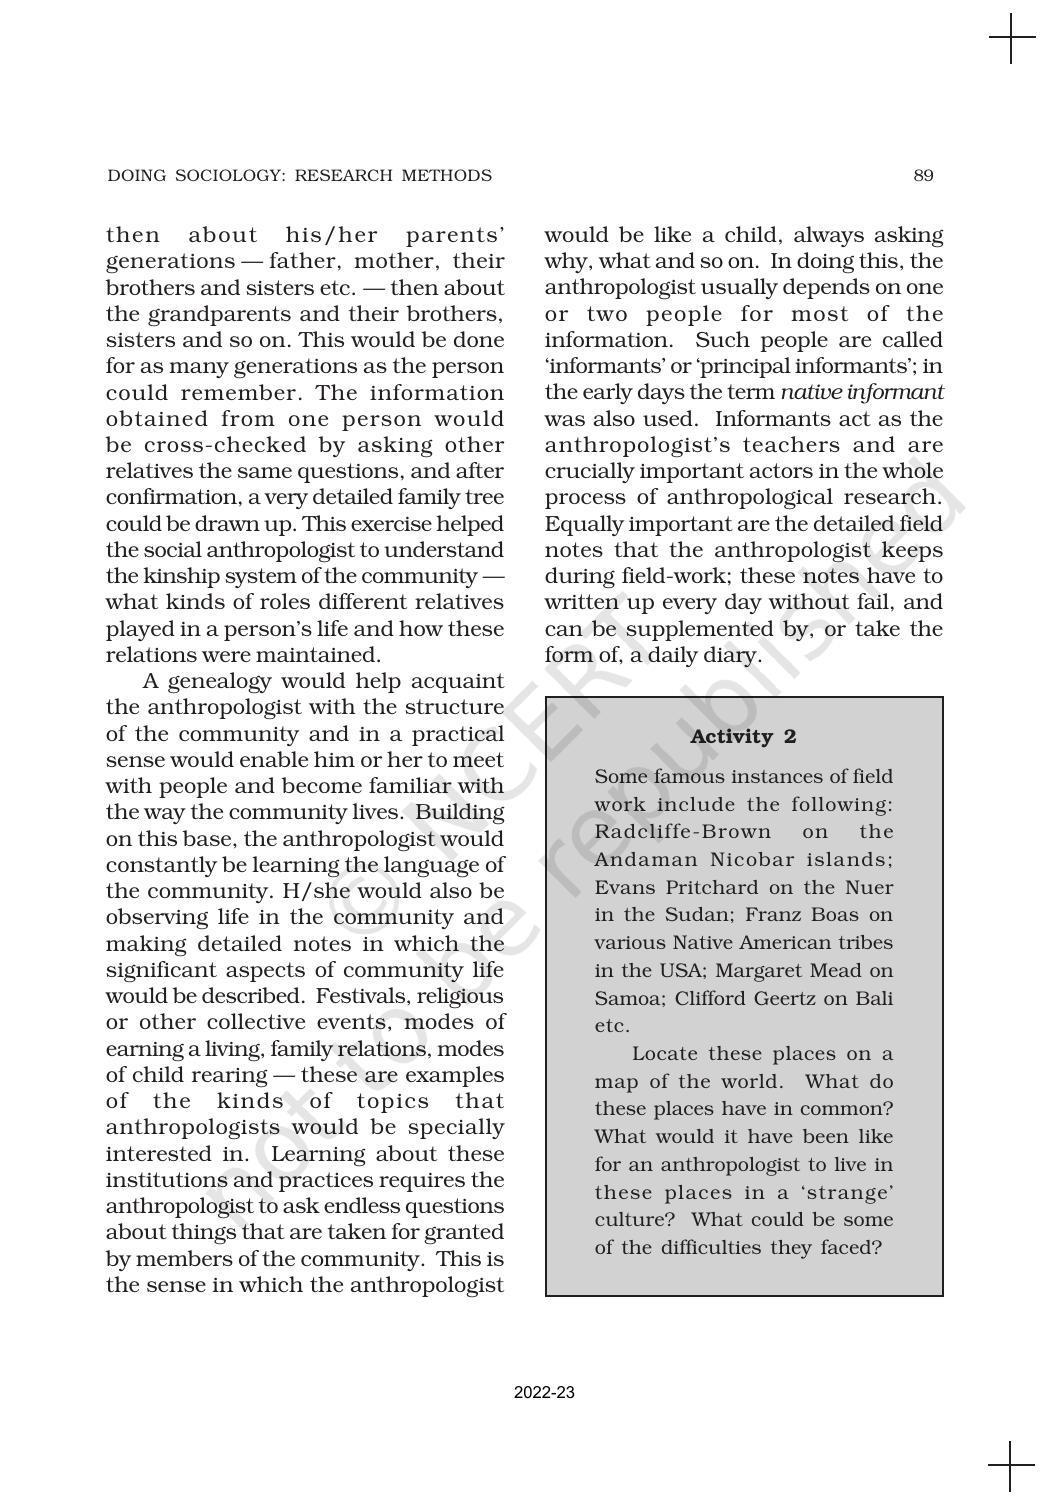 NCERT Book for Class 11 Sociology (Part-I) Chapter 5 Doing Sociology: Research Methods - Page 8